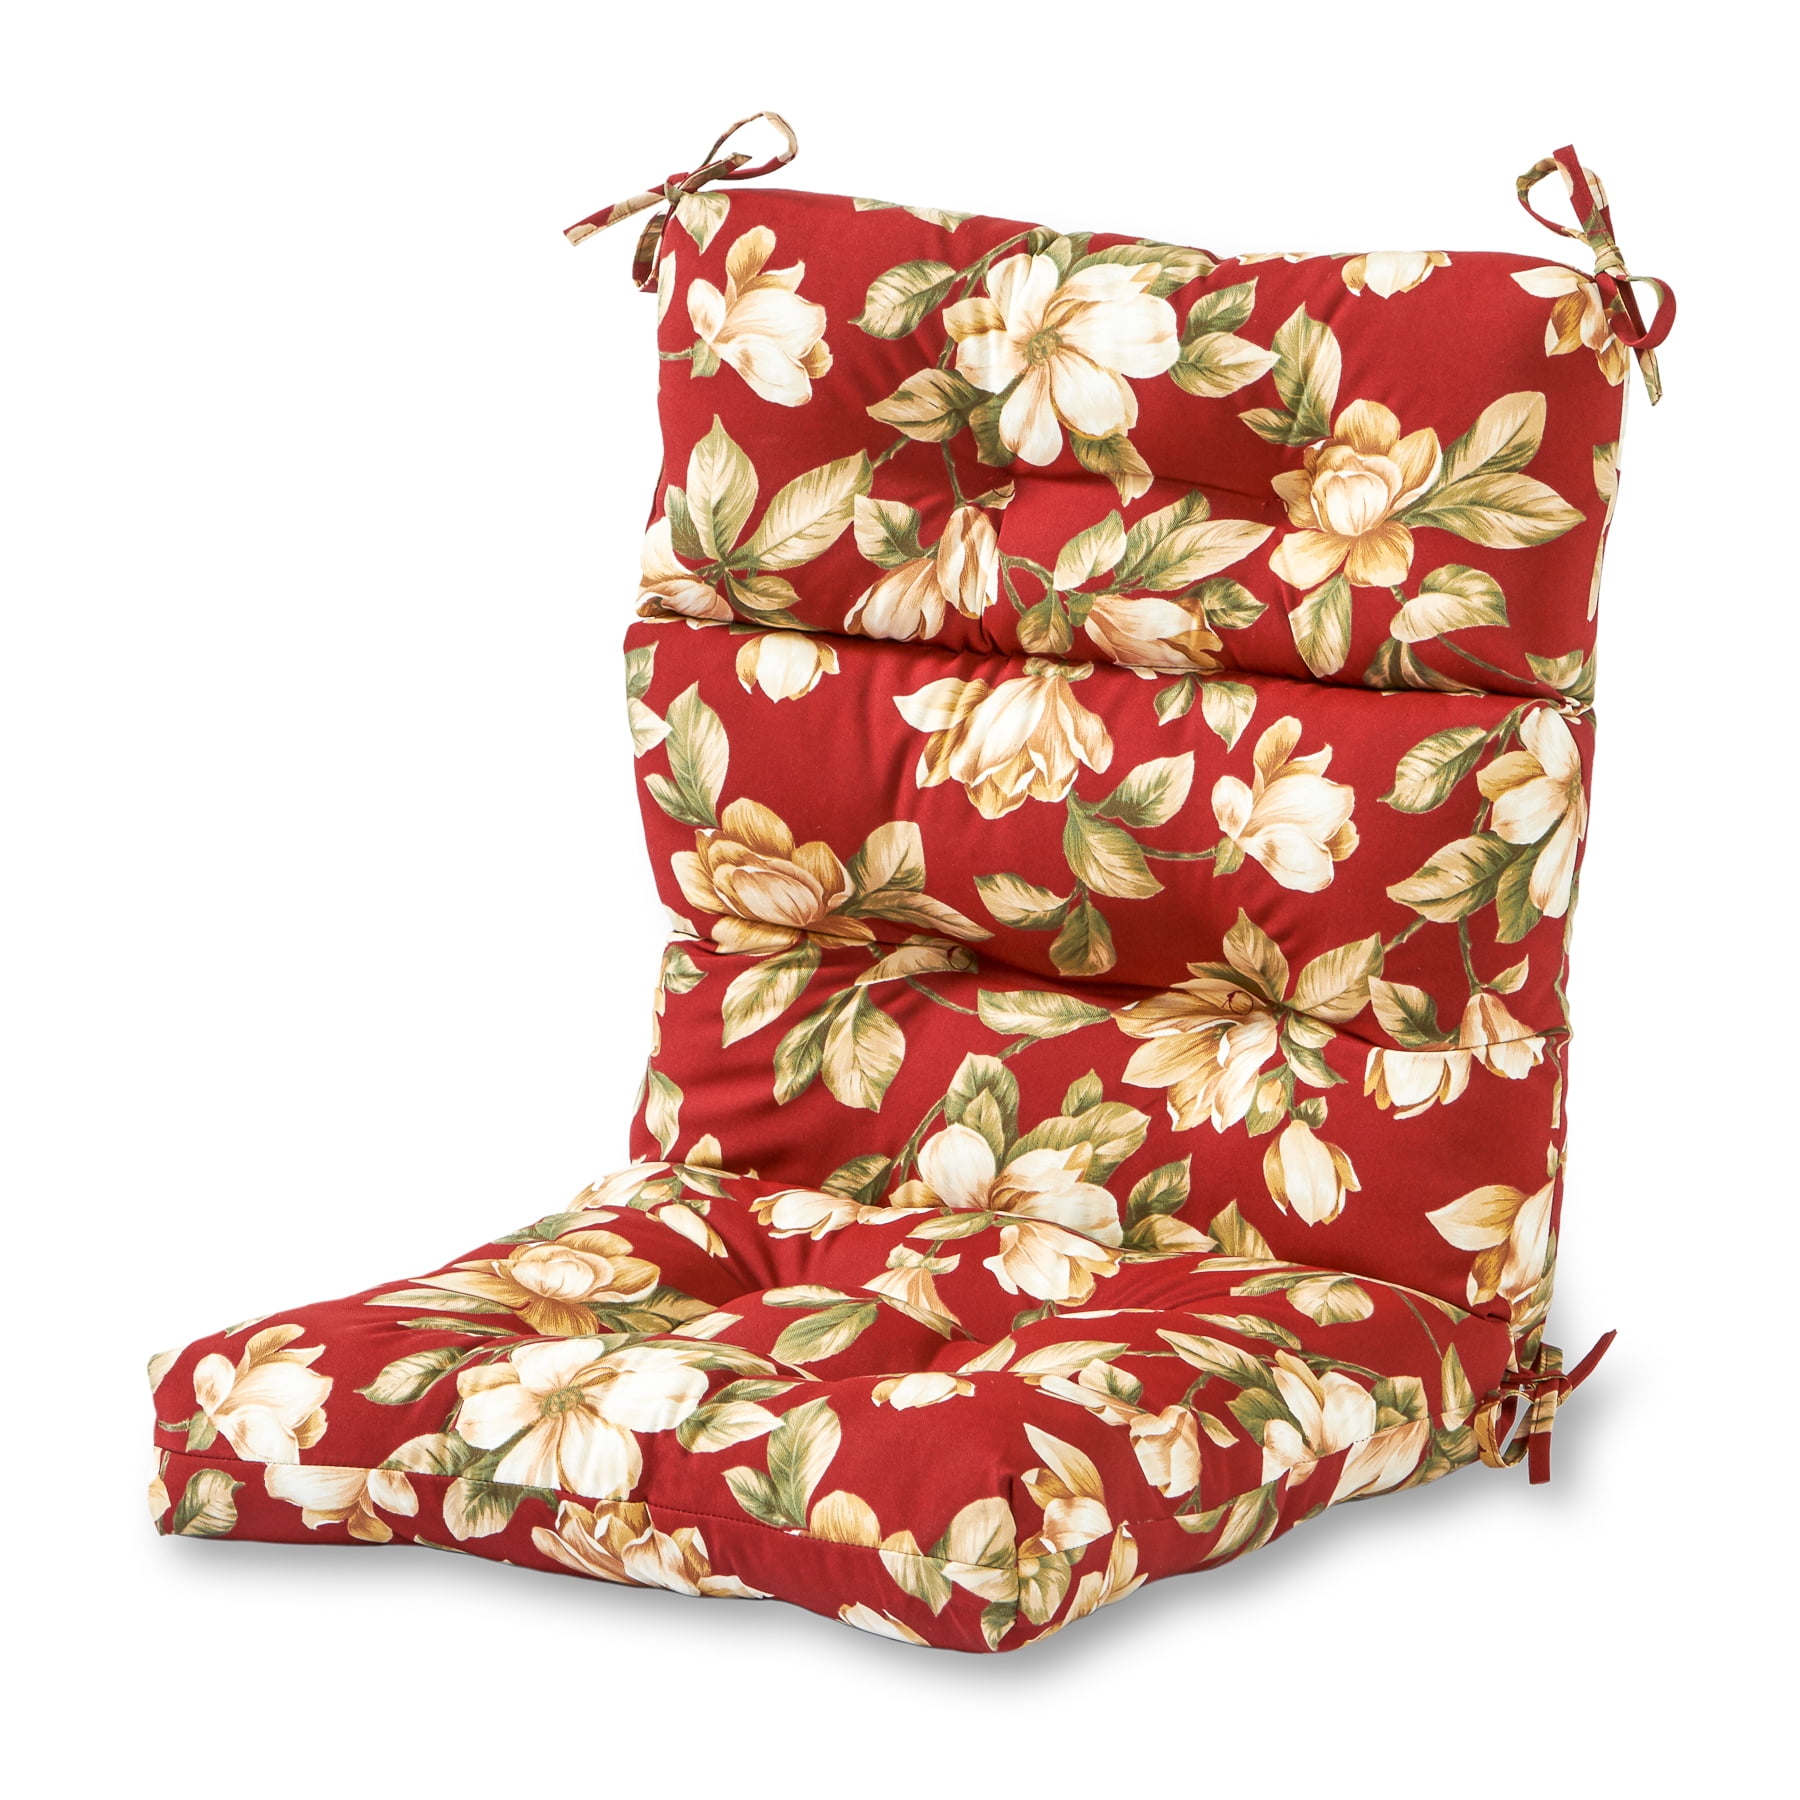 Greendale Home Fashions 44" x 22" Multicolor Floral Rectangle Chair